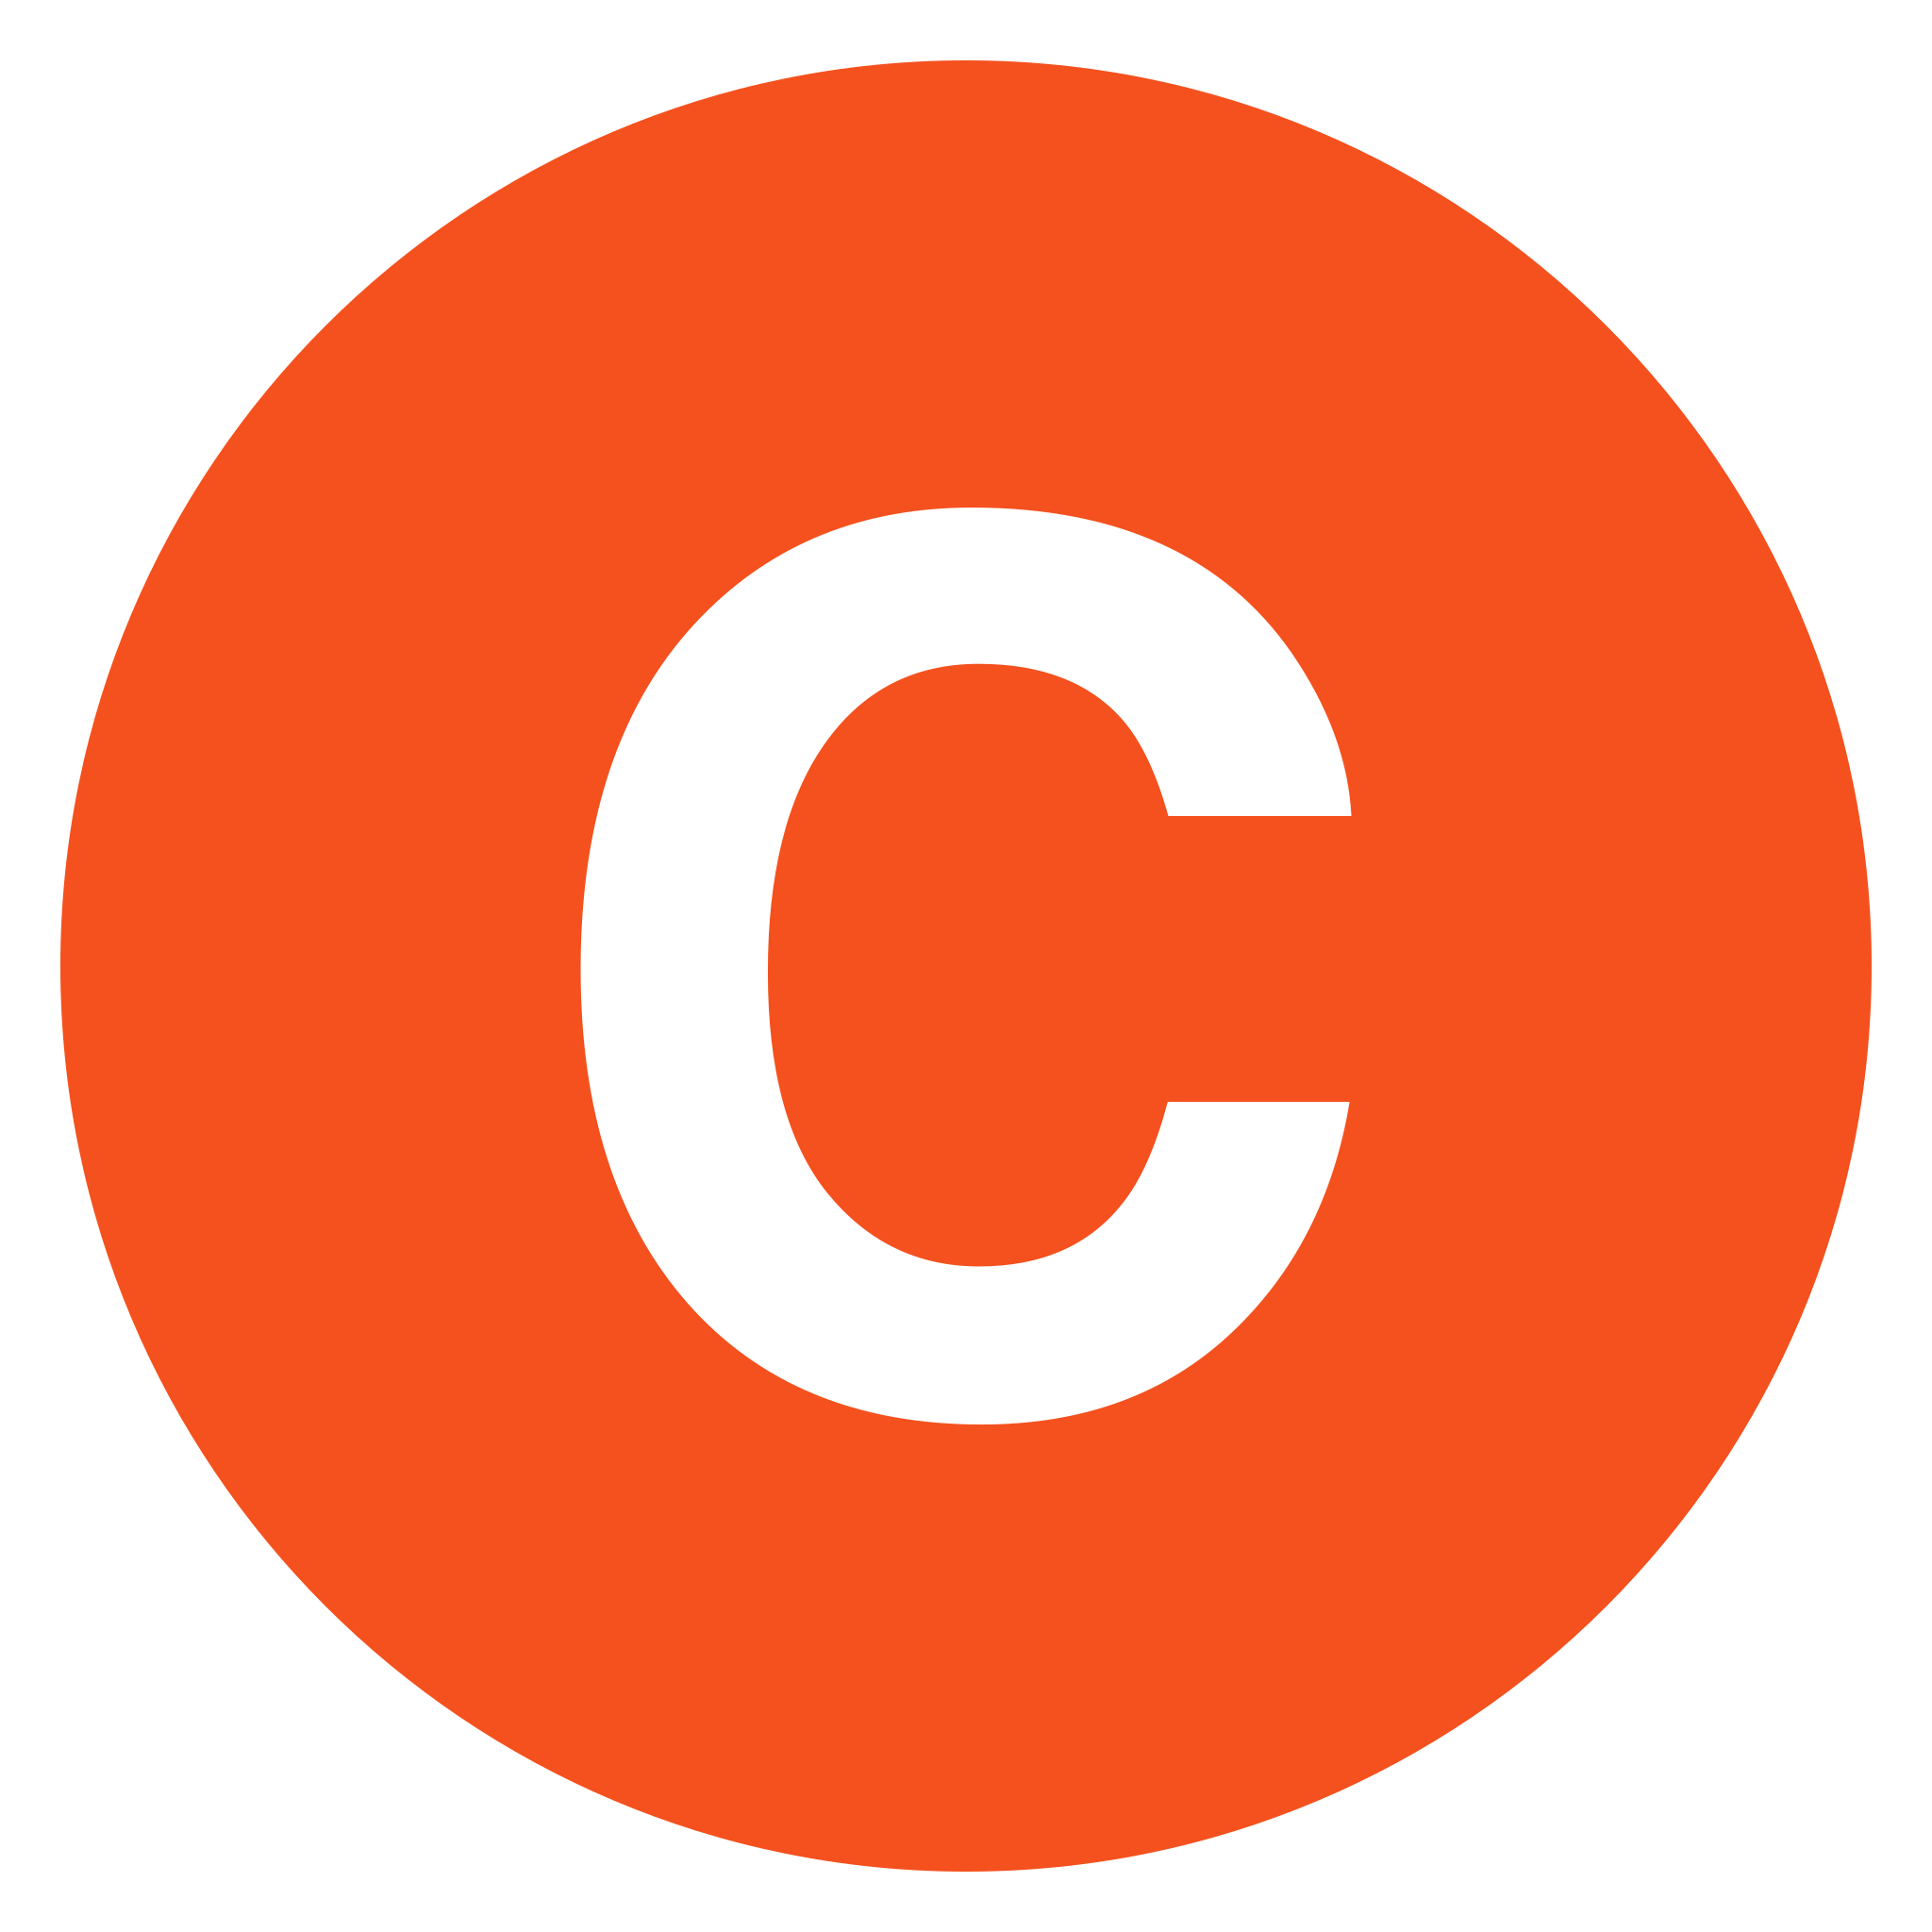 Download File Eo Circle Deep Orange White Letter C Svg Wikimedia Commons